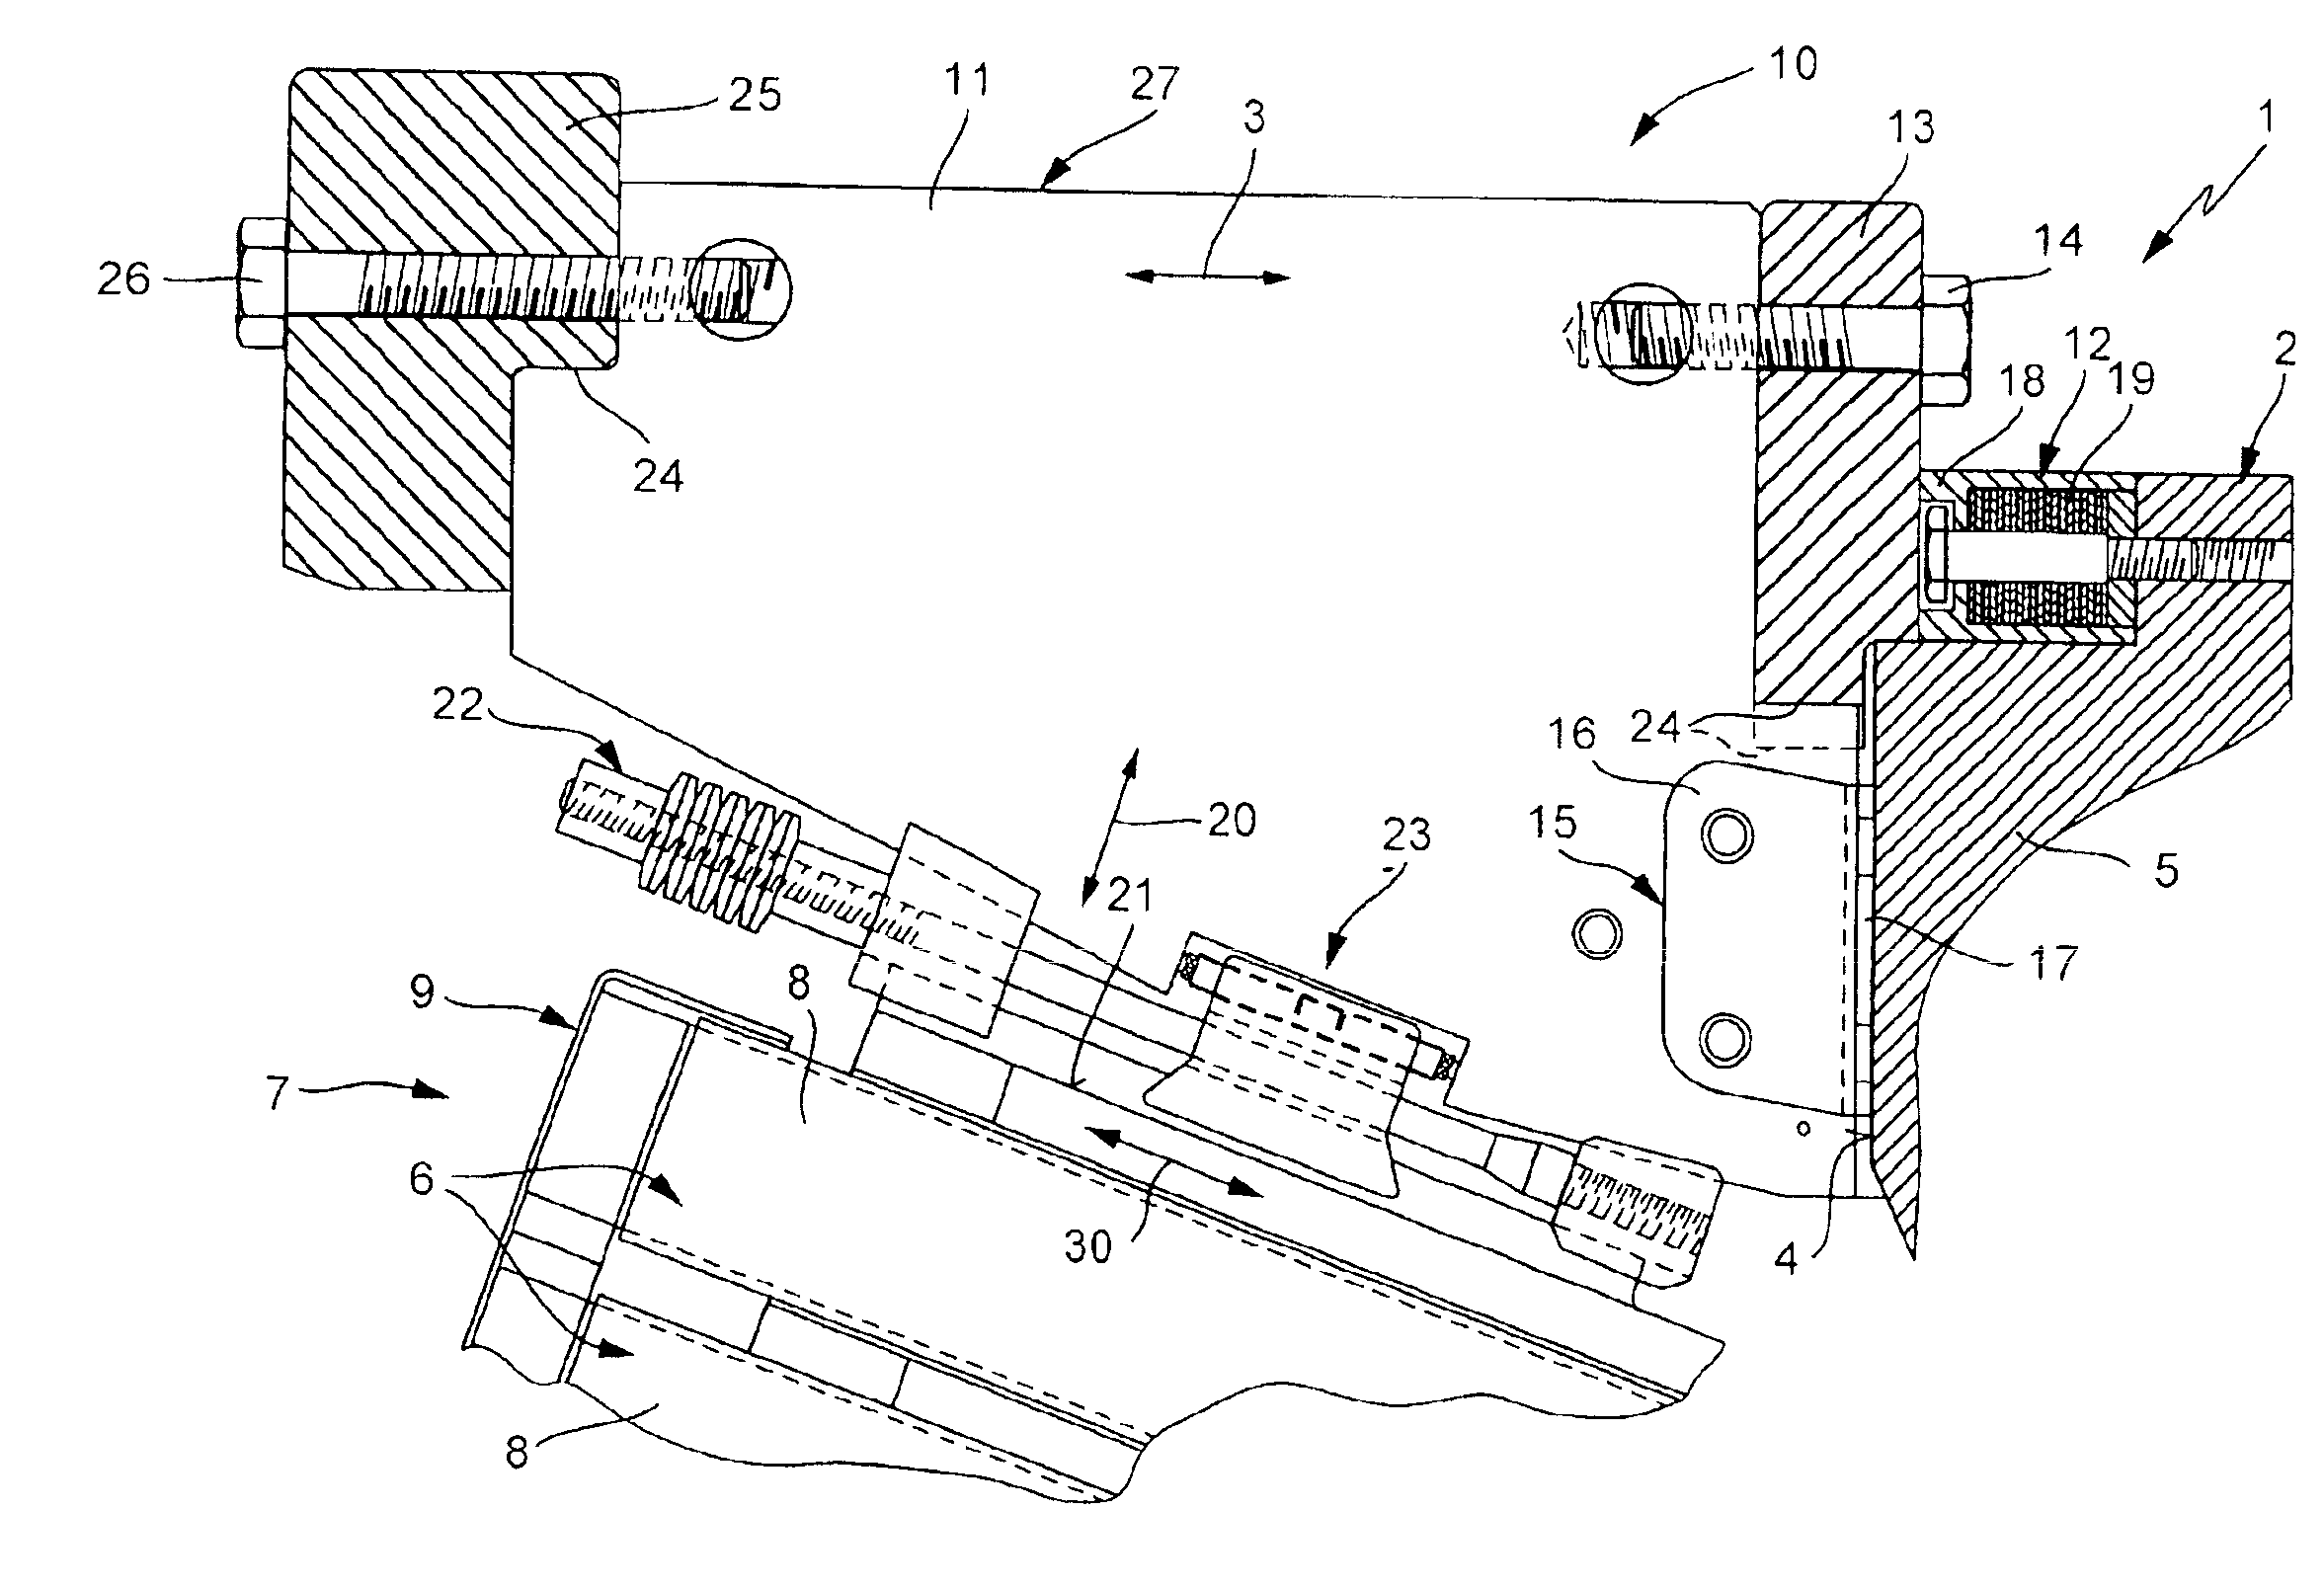 Apparatus for supporting a stator end winding